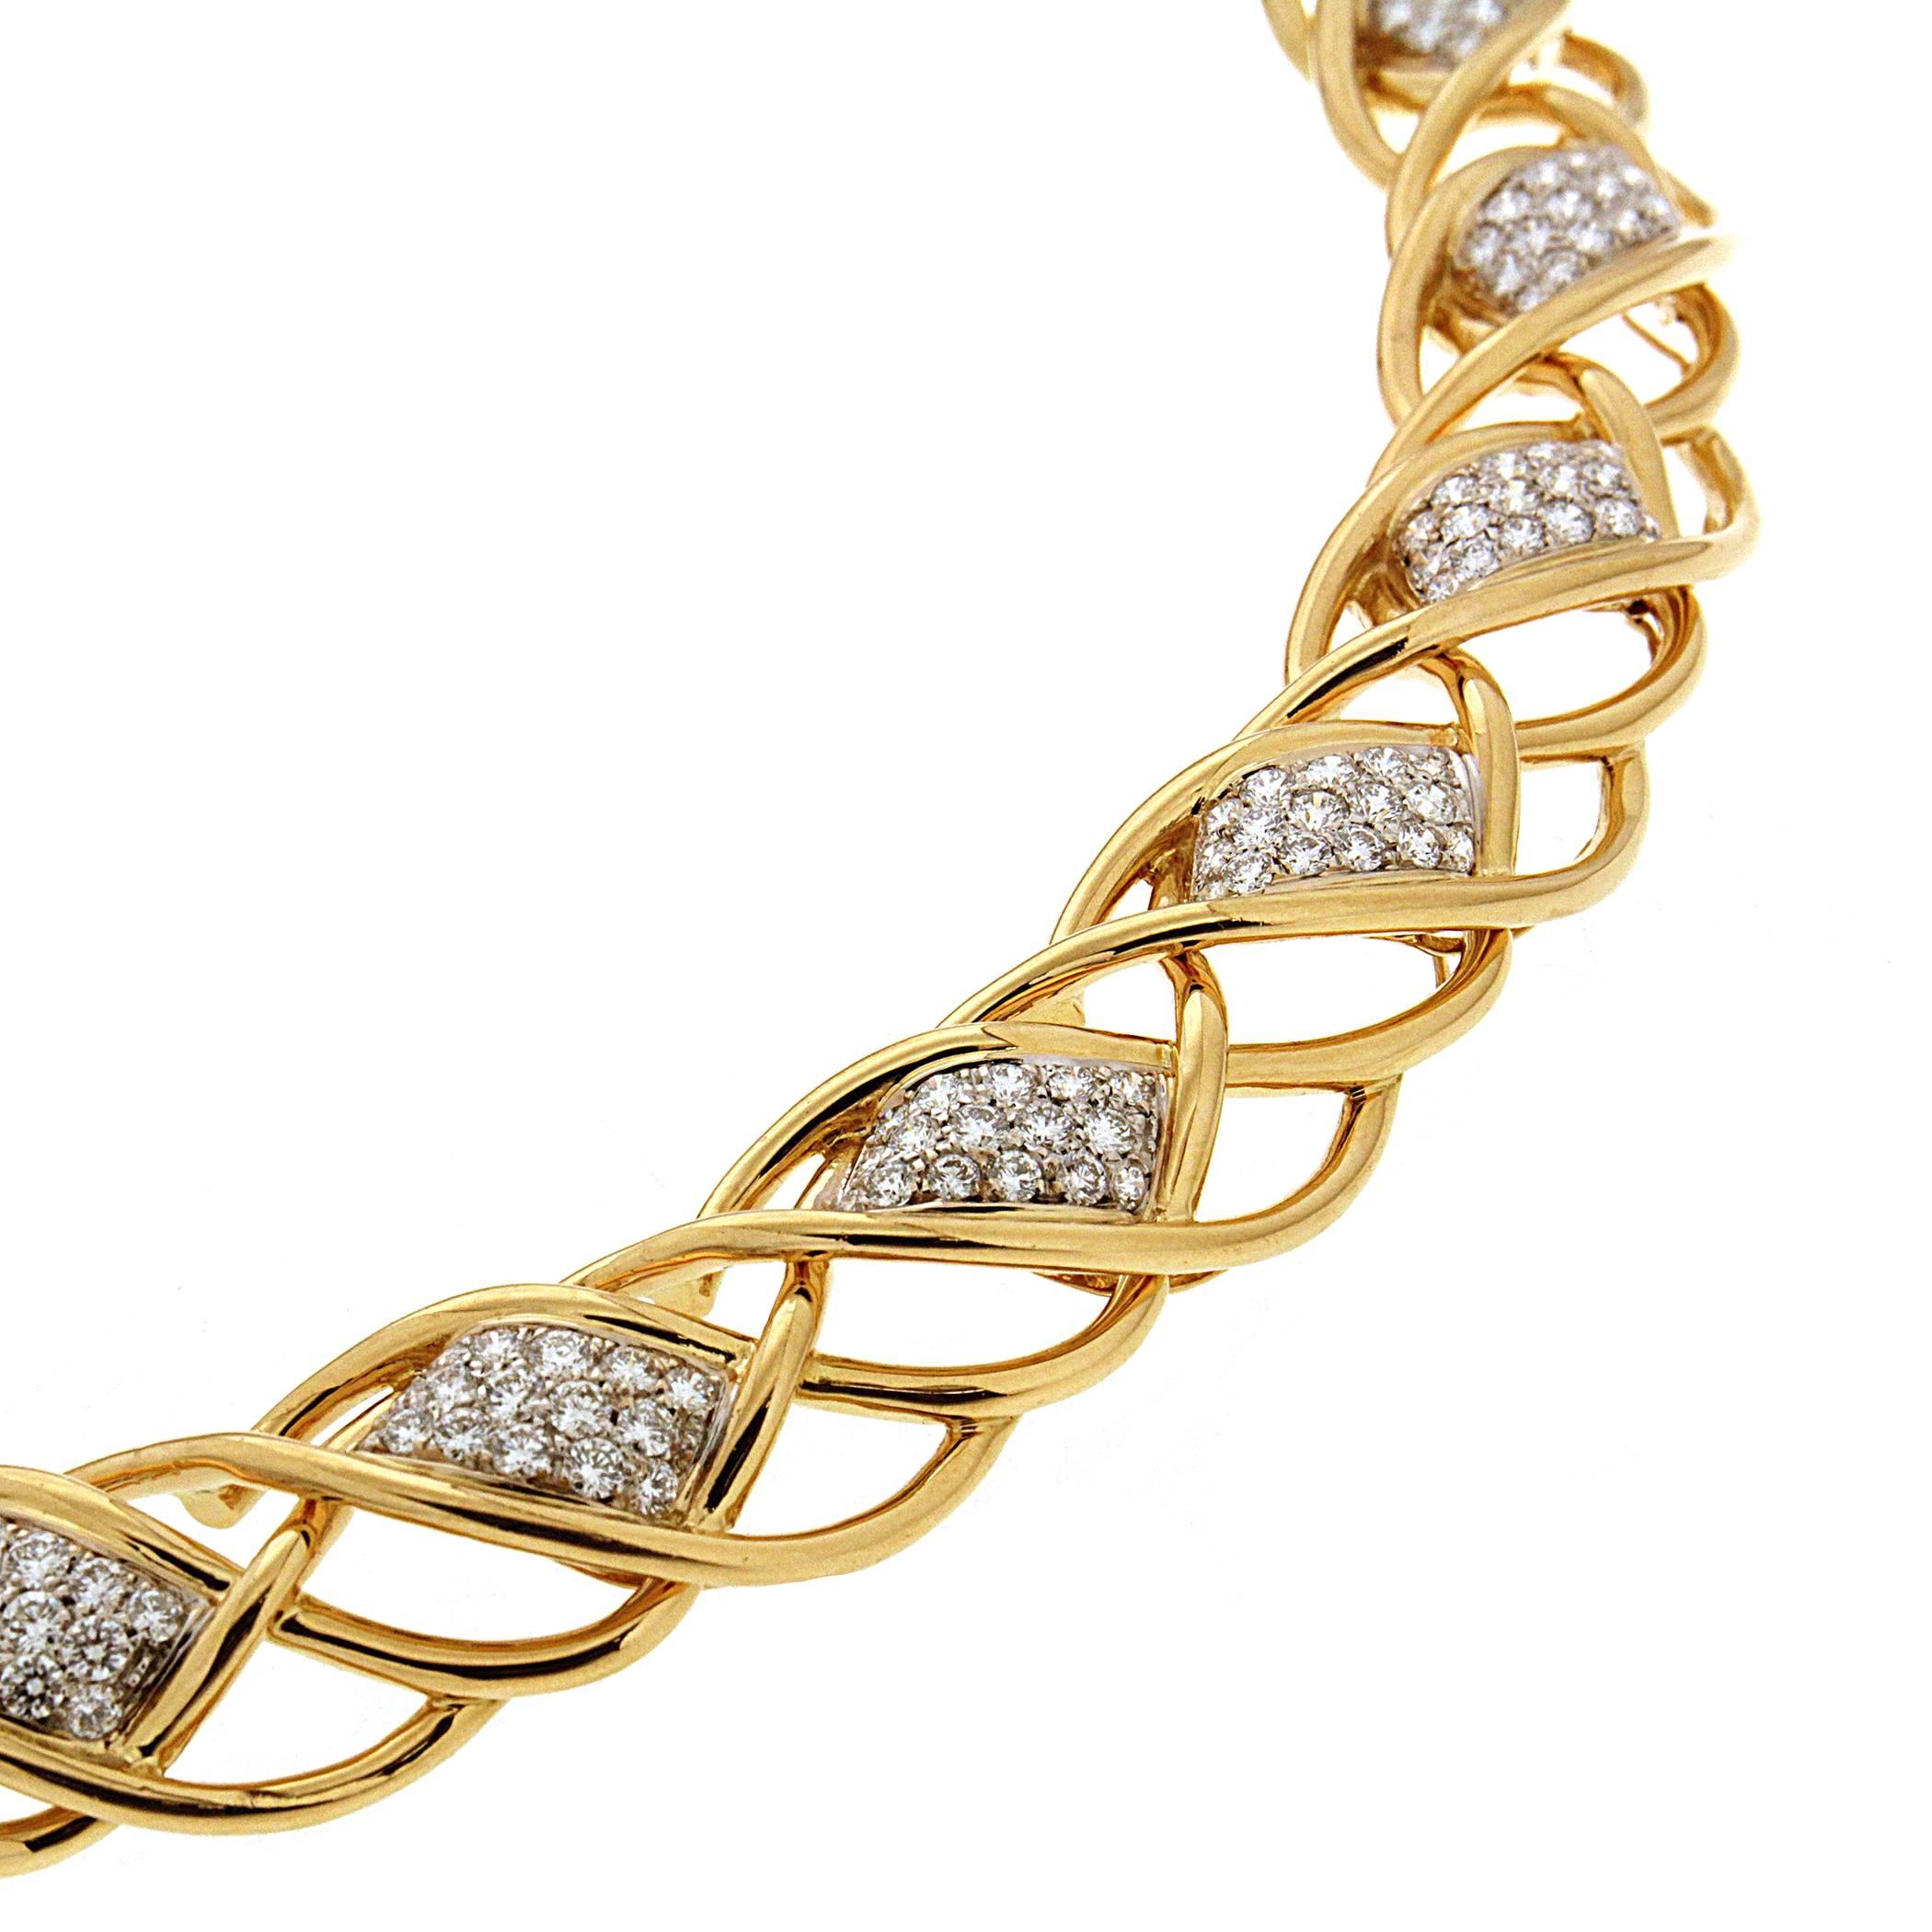 Valentin Magro Curvy Twisted Gold Line Necklace with Diamond Pave Motifs appears to hold a jeweled ribbon. The body is made of 18k yellow gold wires twisted around one another to make a united whole. Pave set round brilliant cut diamonds form eleven